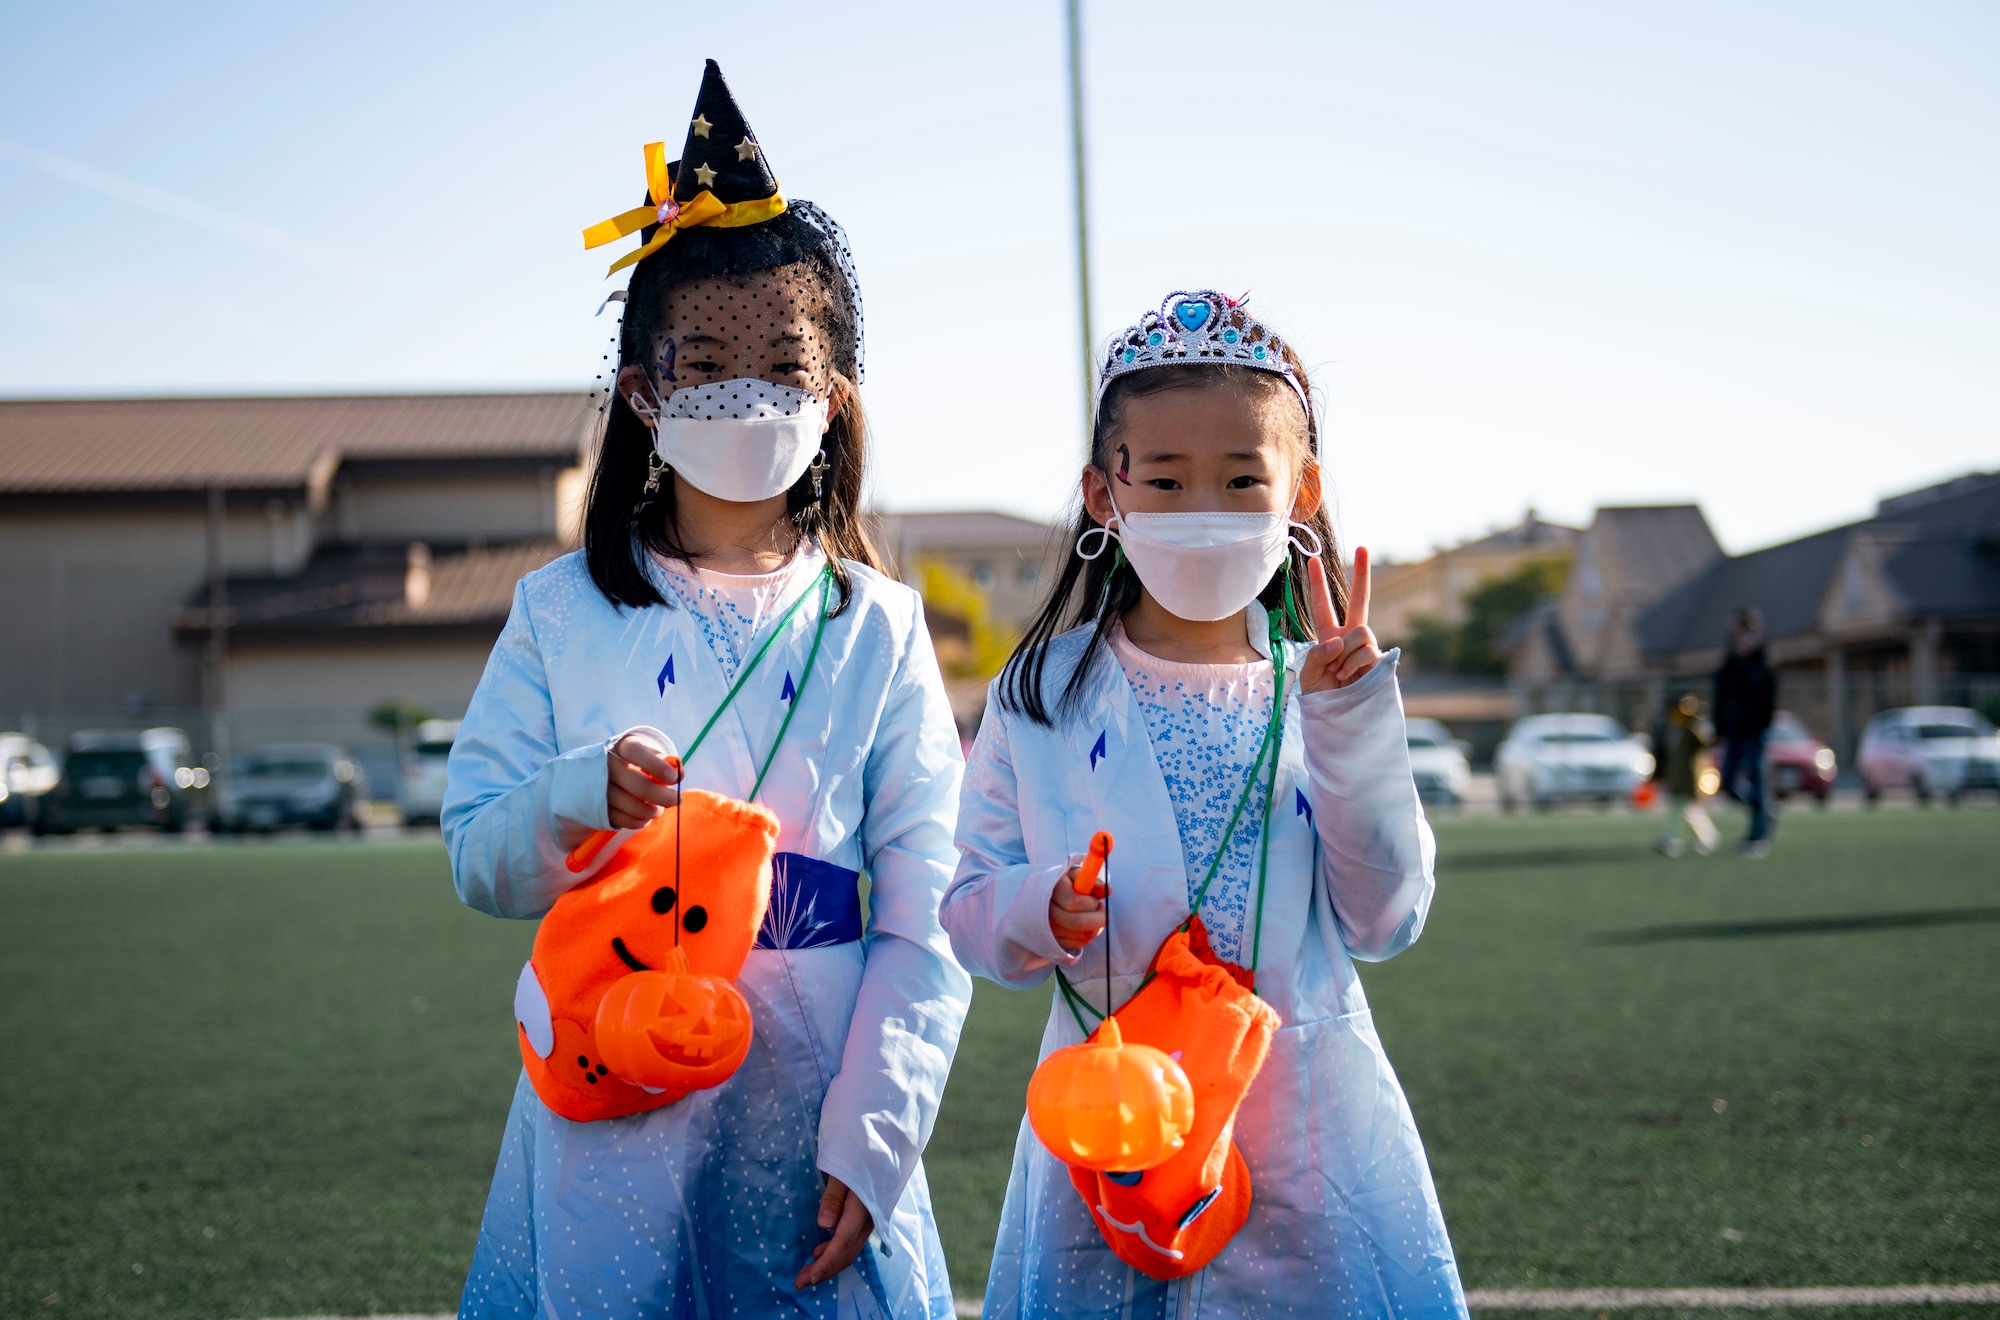 Republic of Korea national children dress up as Elsa, from the Disney movie Frozen, during Kunsan’s Annual Halloween Trick-or-Treat at Kunsan Air Base, Republic of Korea, October, 28, 2021. The 8th Civil Engineer Squadron hosted this years event which was open to all U.S. Military and South Korean Nationals with base access. (U.S. Air Force photo by Senior Airman Suzie Plotnikov)